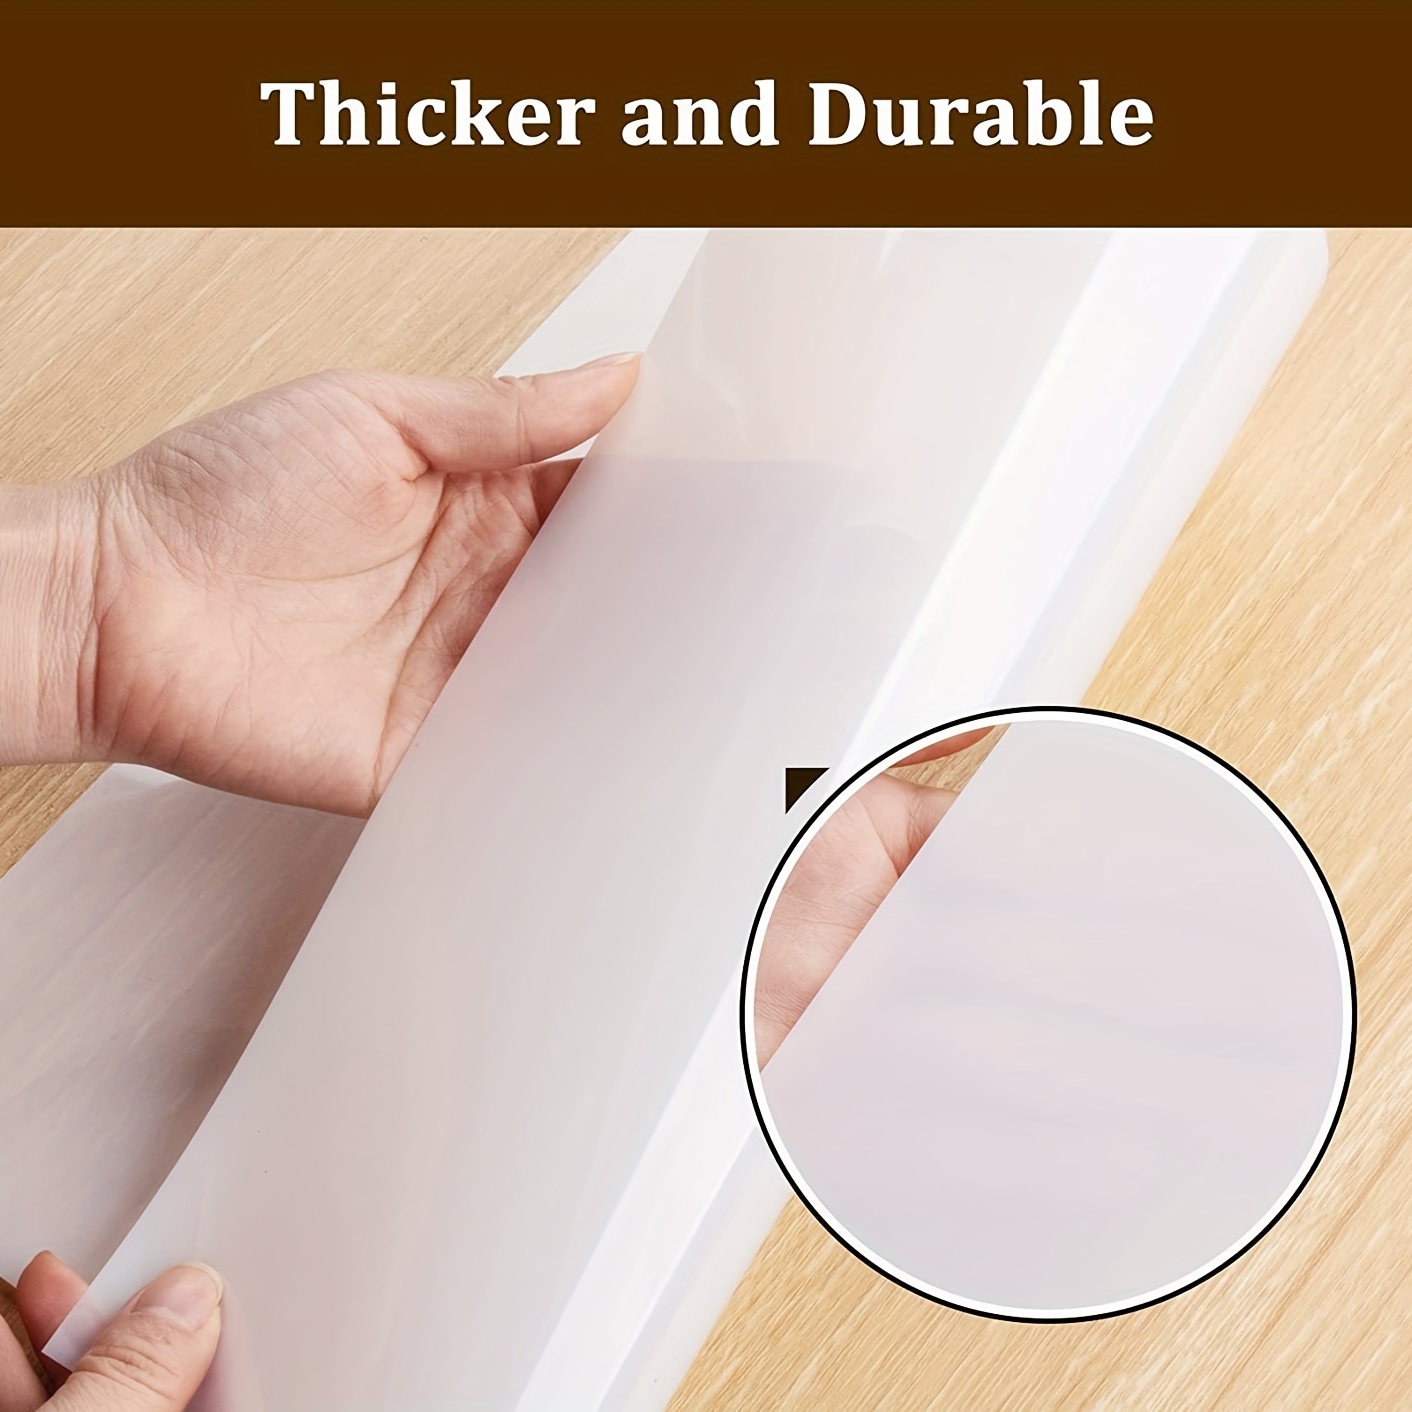 10PCS 7mil Blank Mylar Stencil Sheets,12X12 inch Milky Translucent PET  Blank Stencils Sheets,Template Material for Cutting Machines, Laser  Cutting